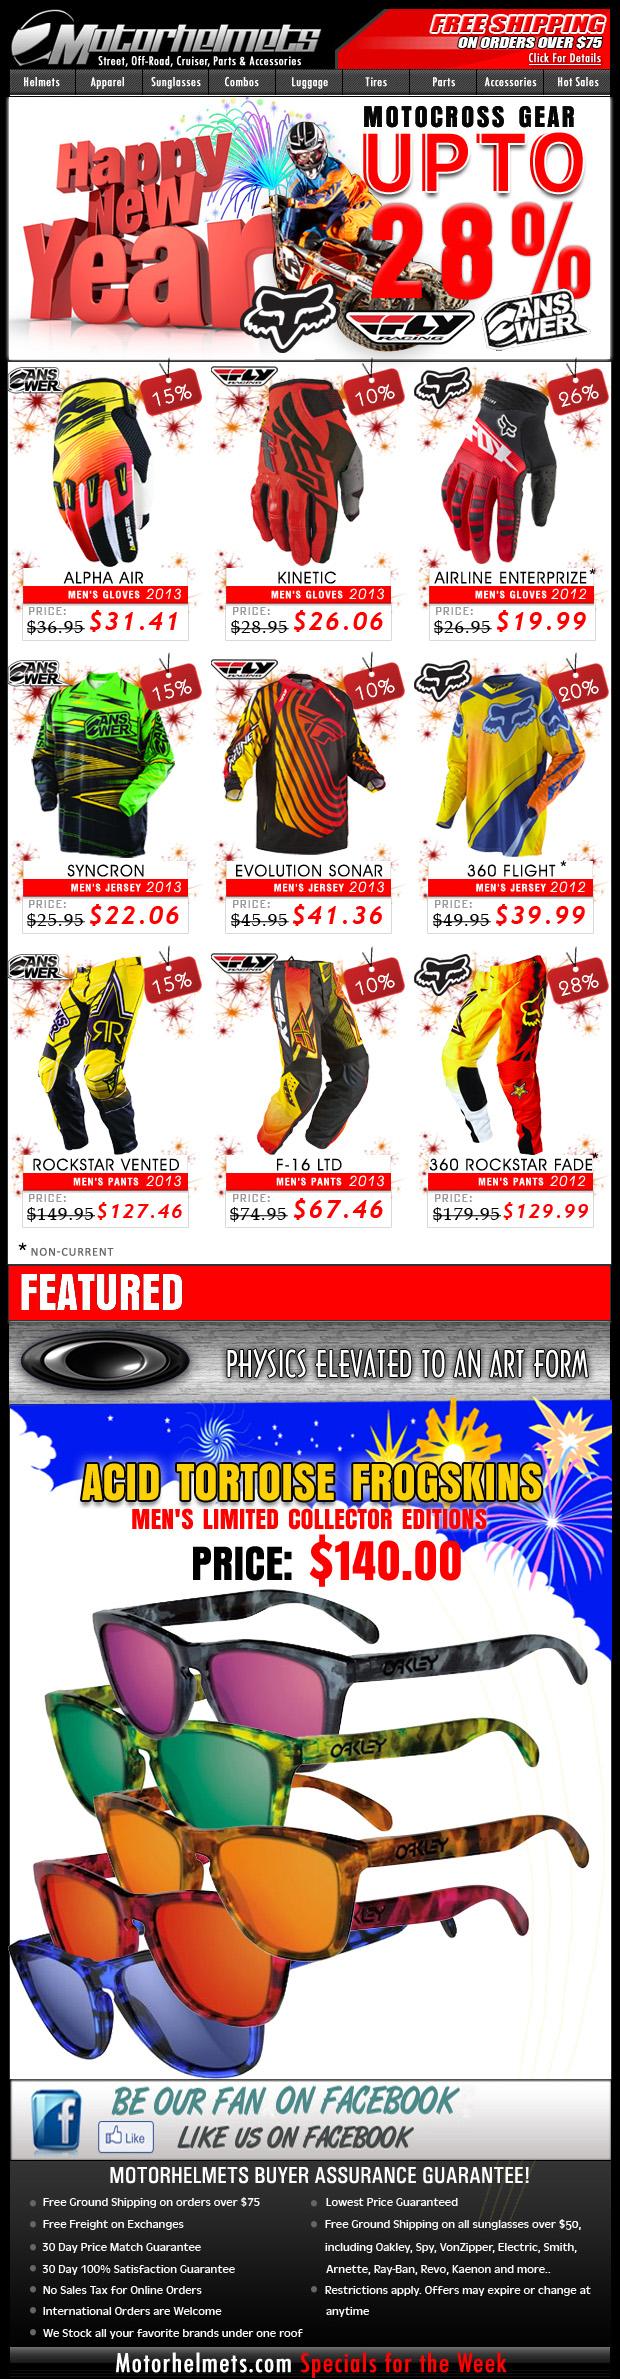 Start 2013 with a BANG with DISCOUNTS on Premium Gear from Fox, Fly and Answer!